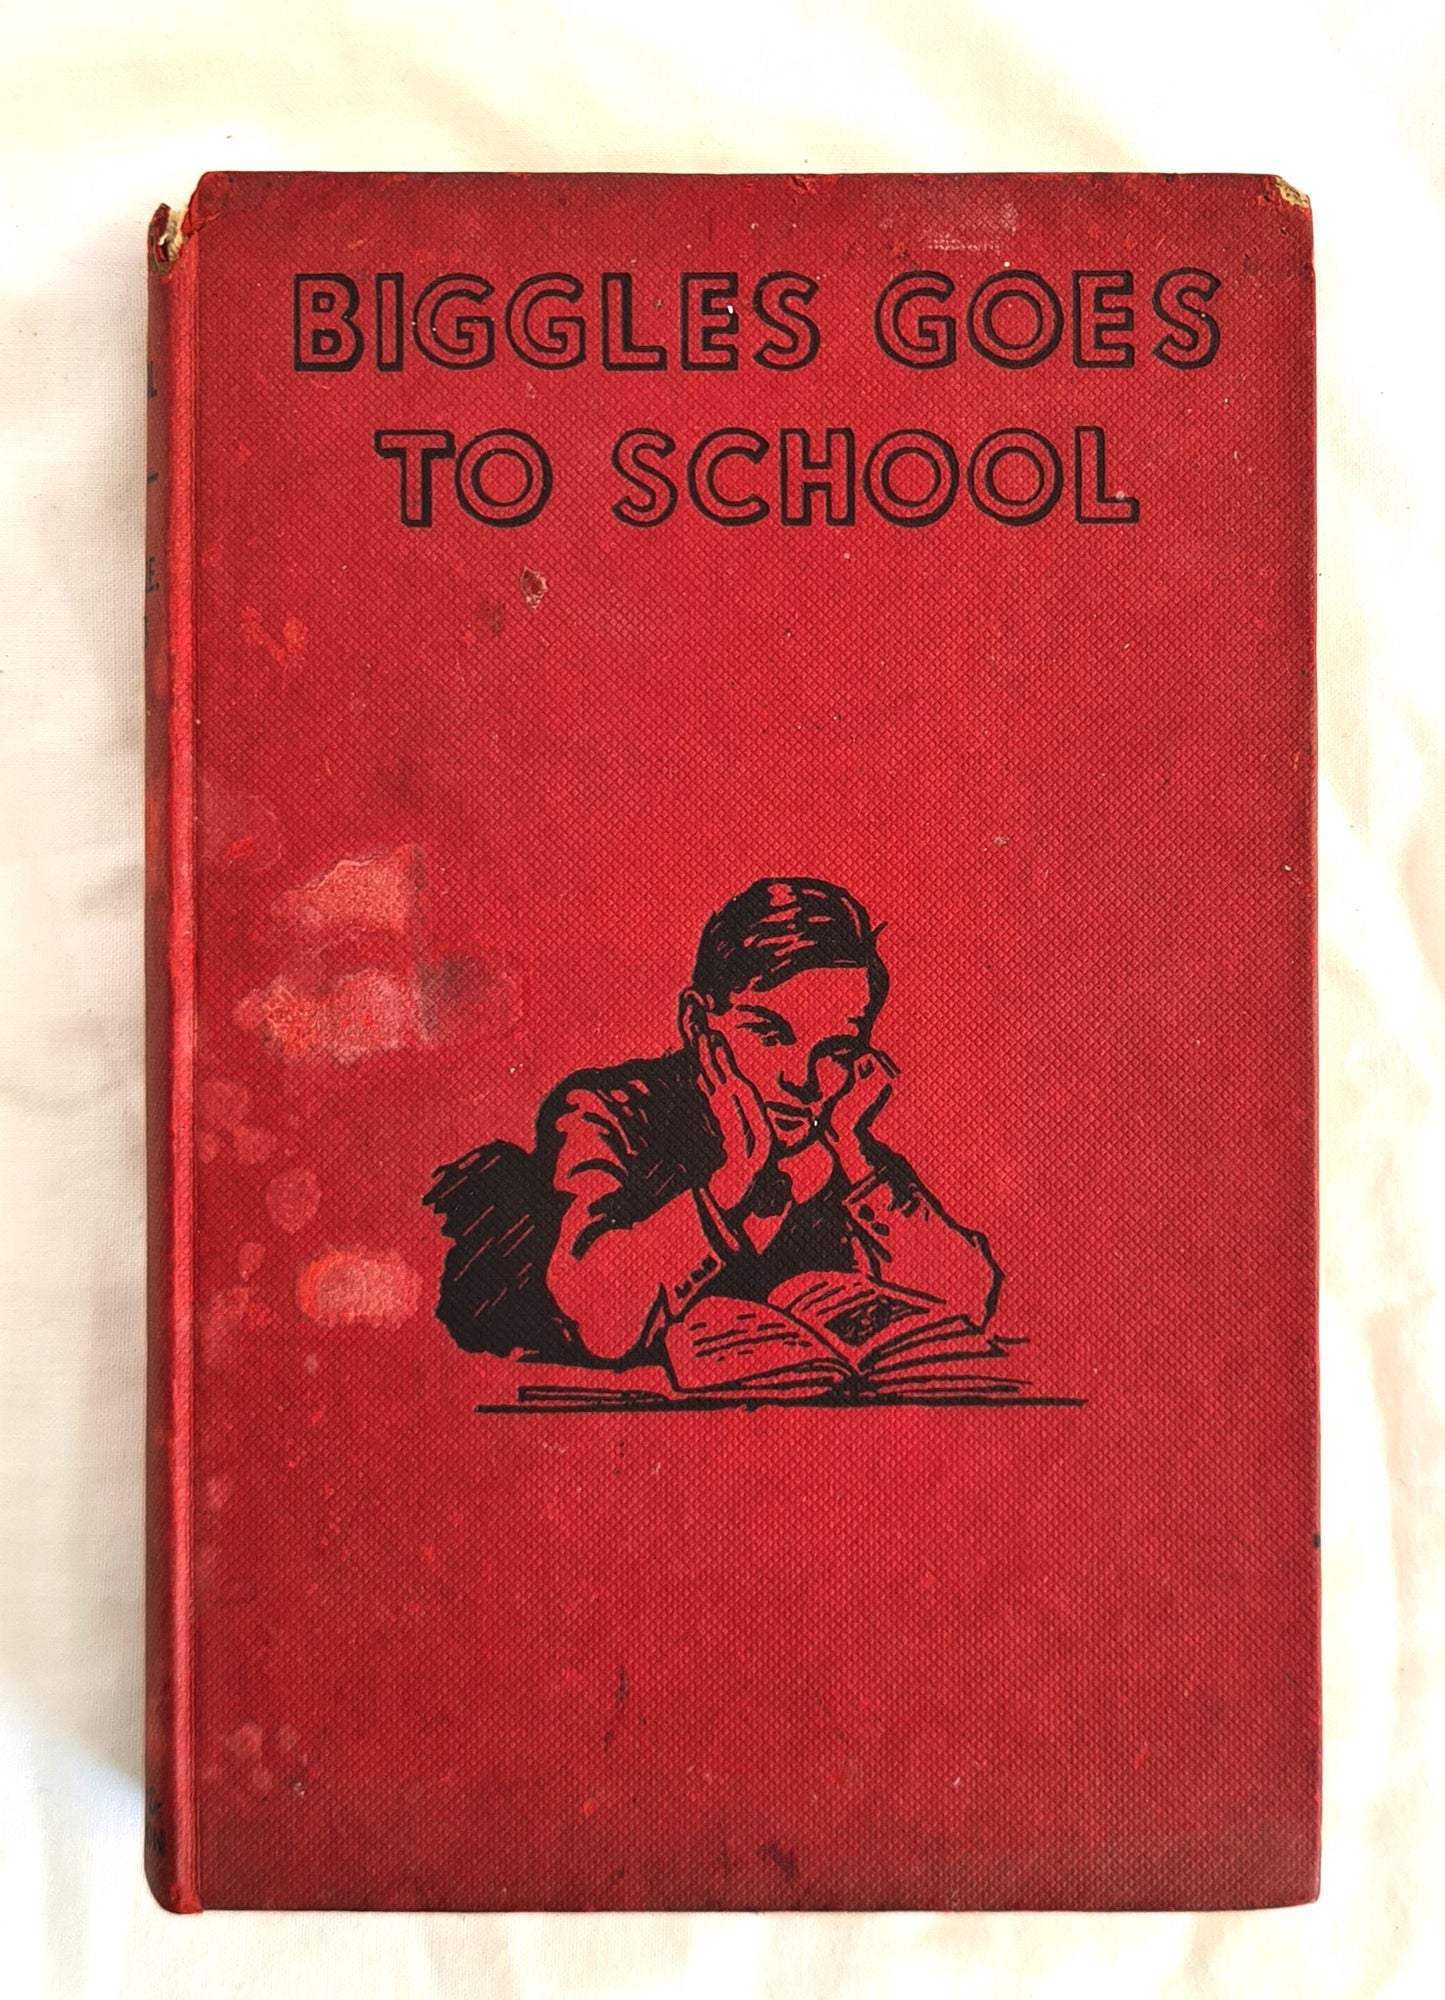 Biggles Goes to School  by Capt. W. E. Johns  The Story of Biggles’s Early Life and School Days